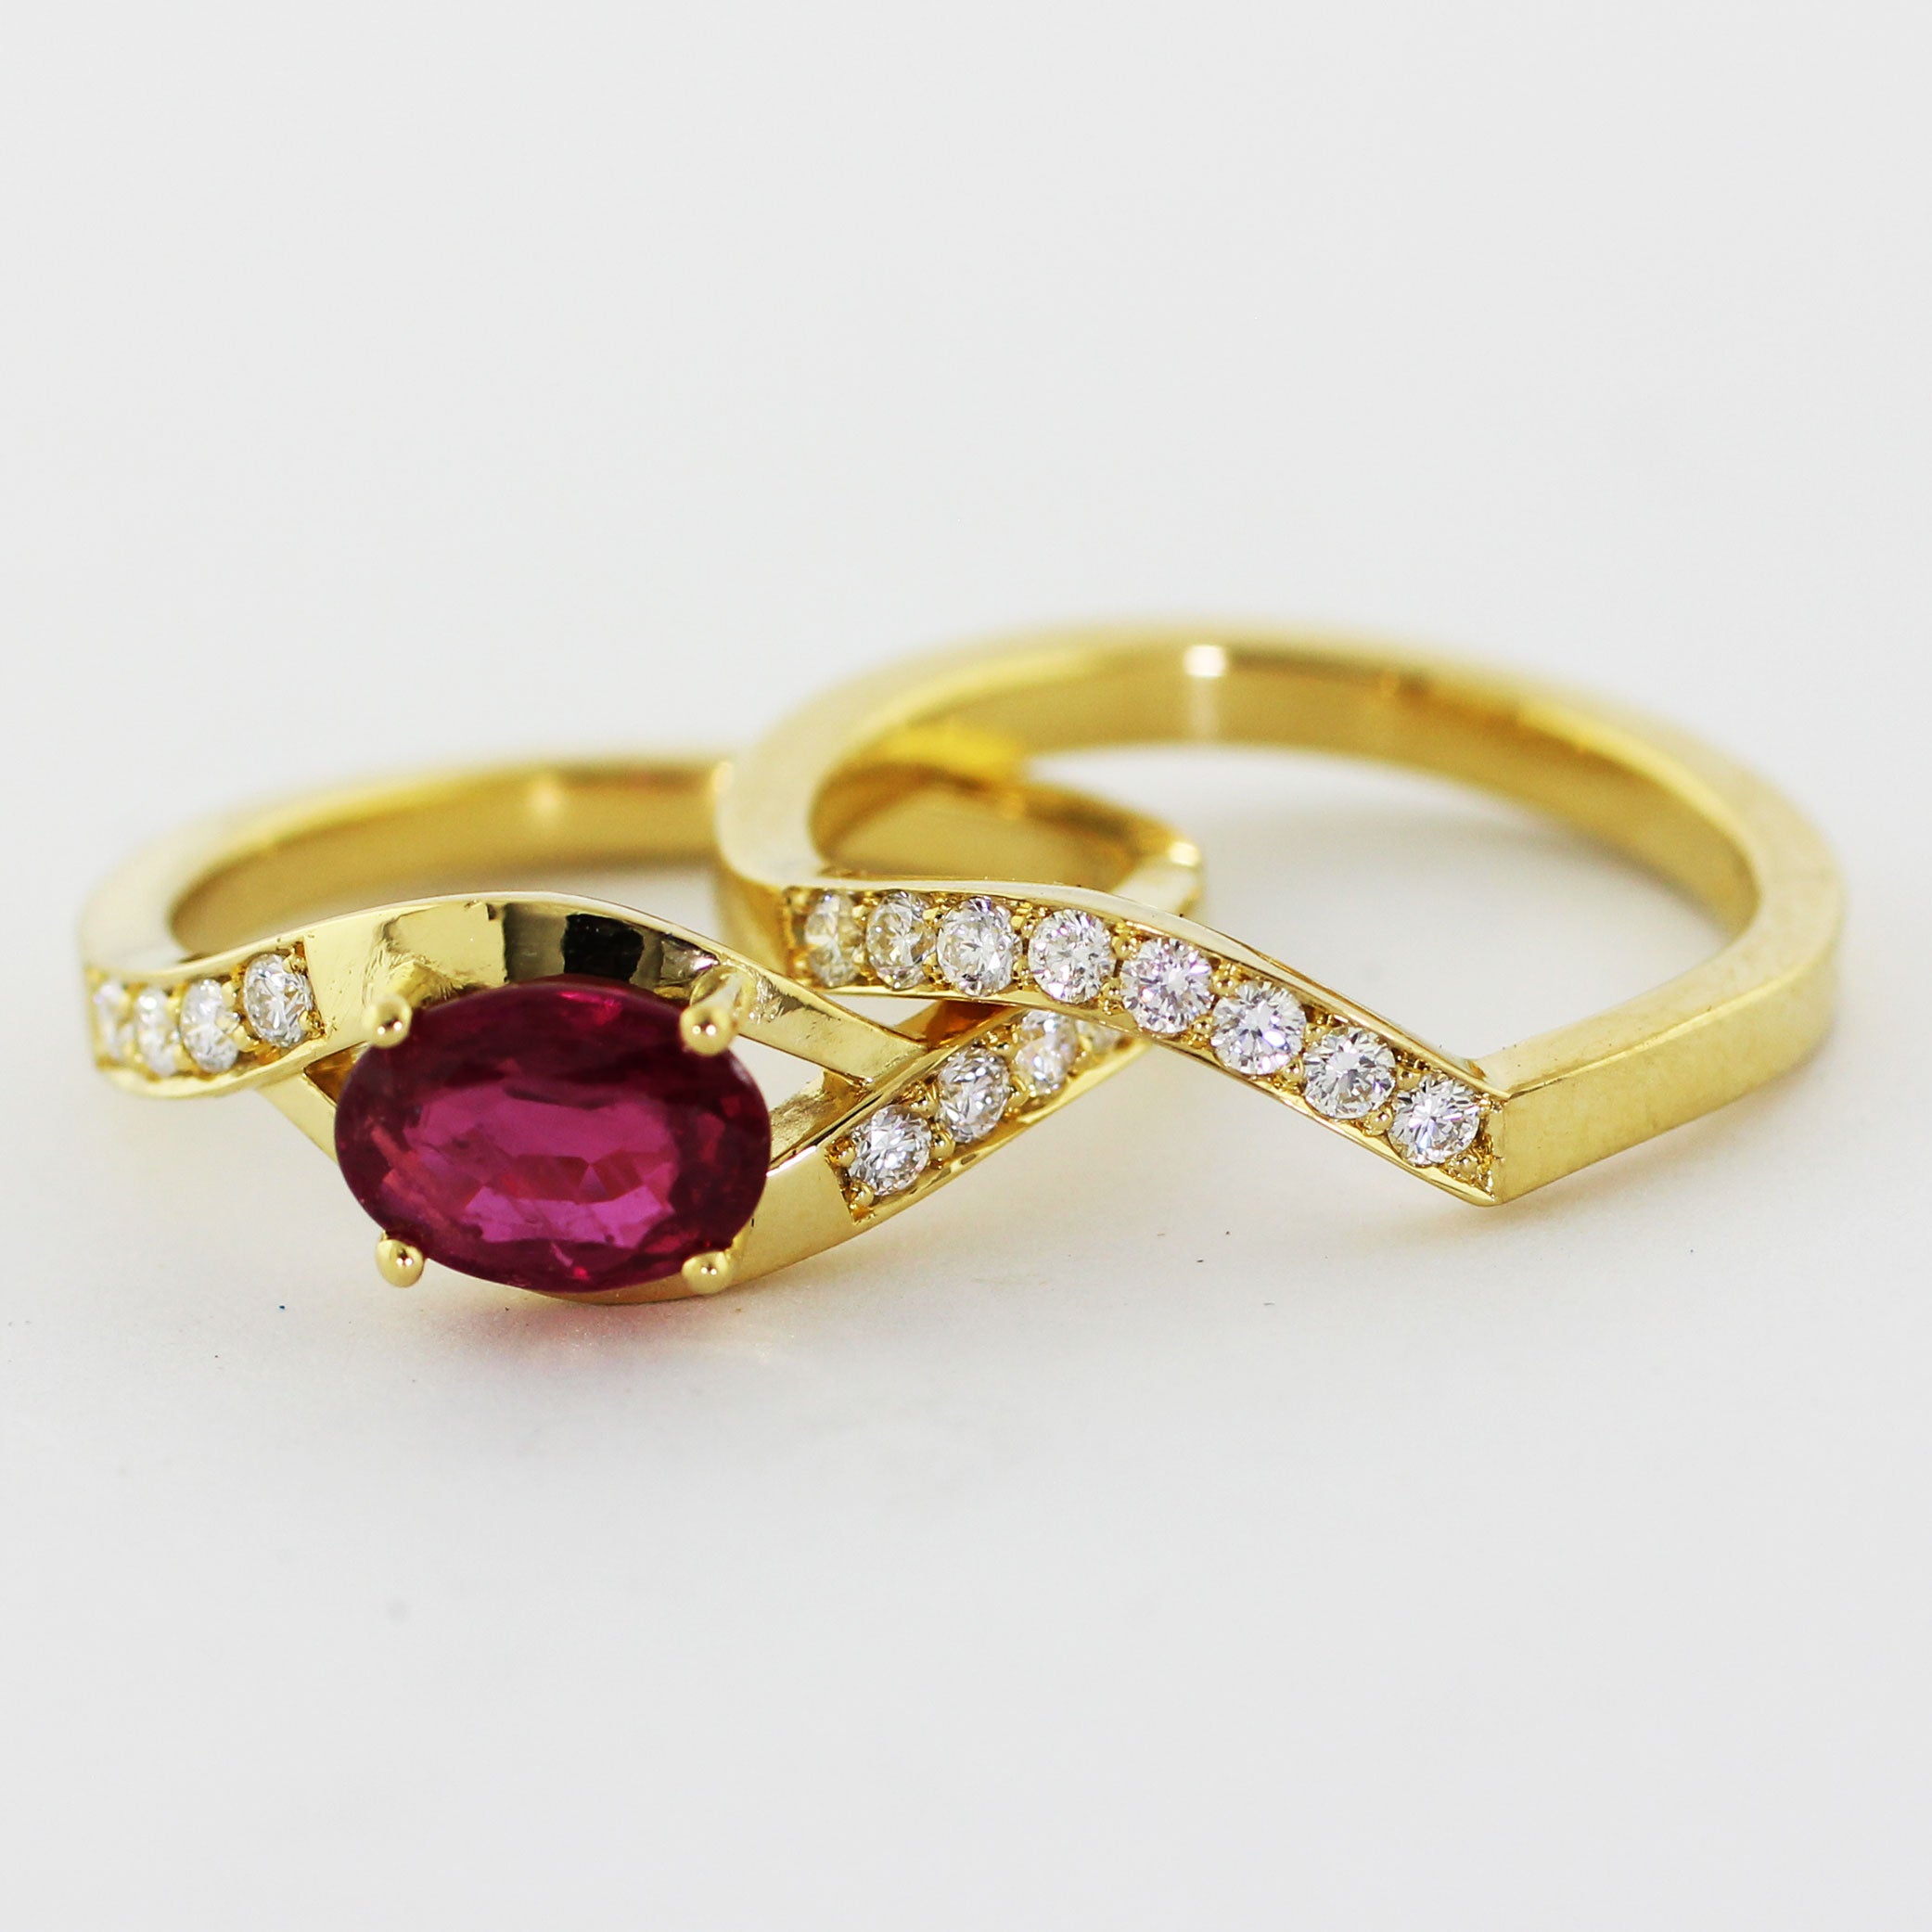 Custom 18k yellow gold engagement ring and matching wedding band, hand-fabricated with a bypass-style crown. The engagement ring features a brilliant prong-set center ruby with four 2.2mm diamonds on each side. The matching shadow band boasts the same square-edged shank adorned with eight 2.2mm bead-set diamonds.